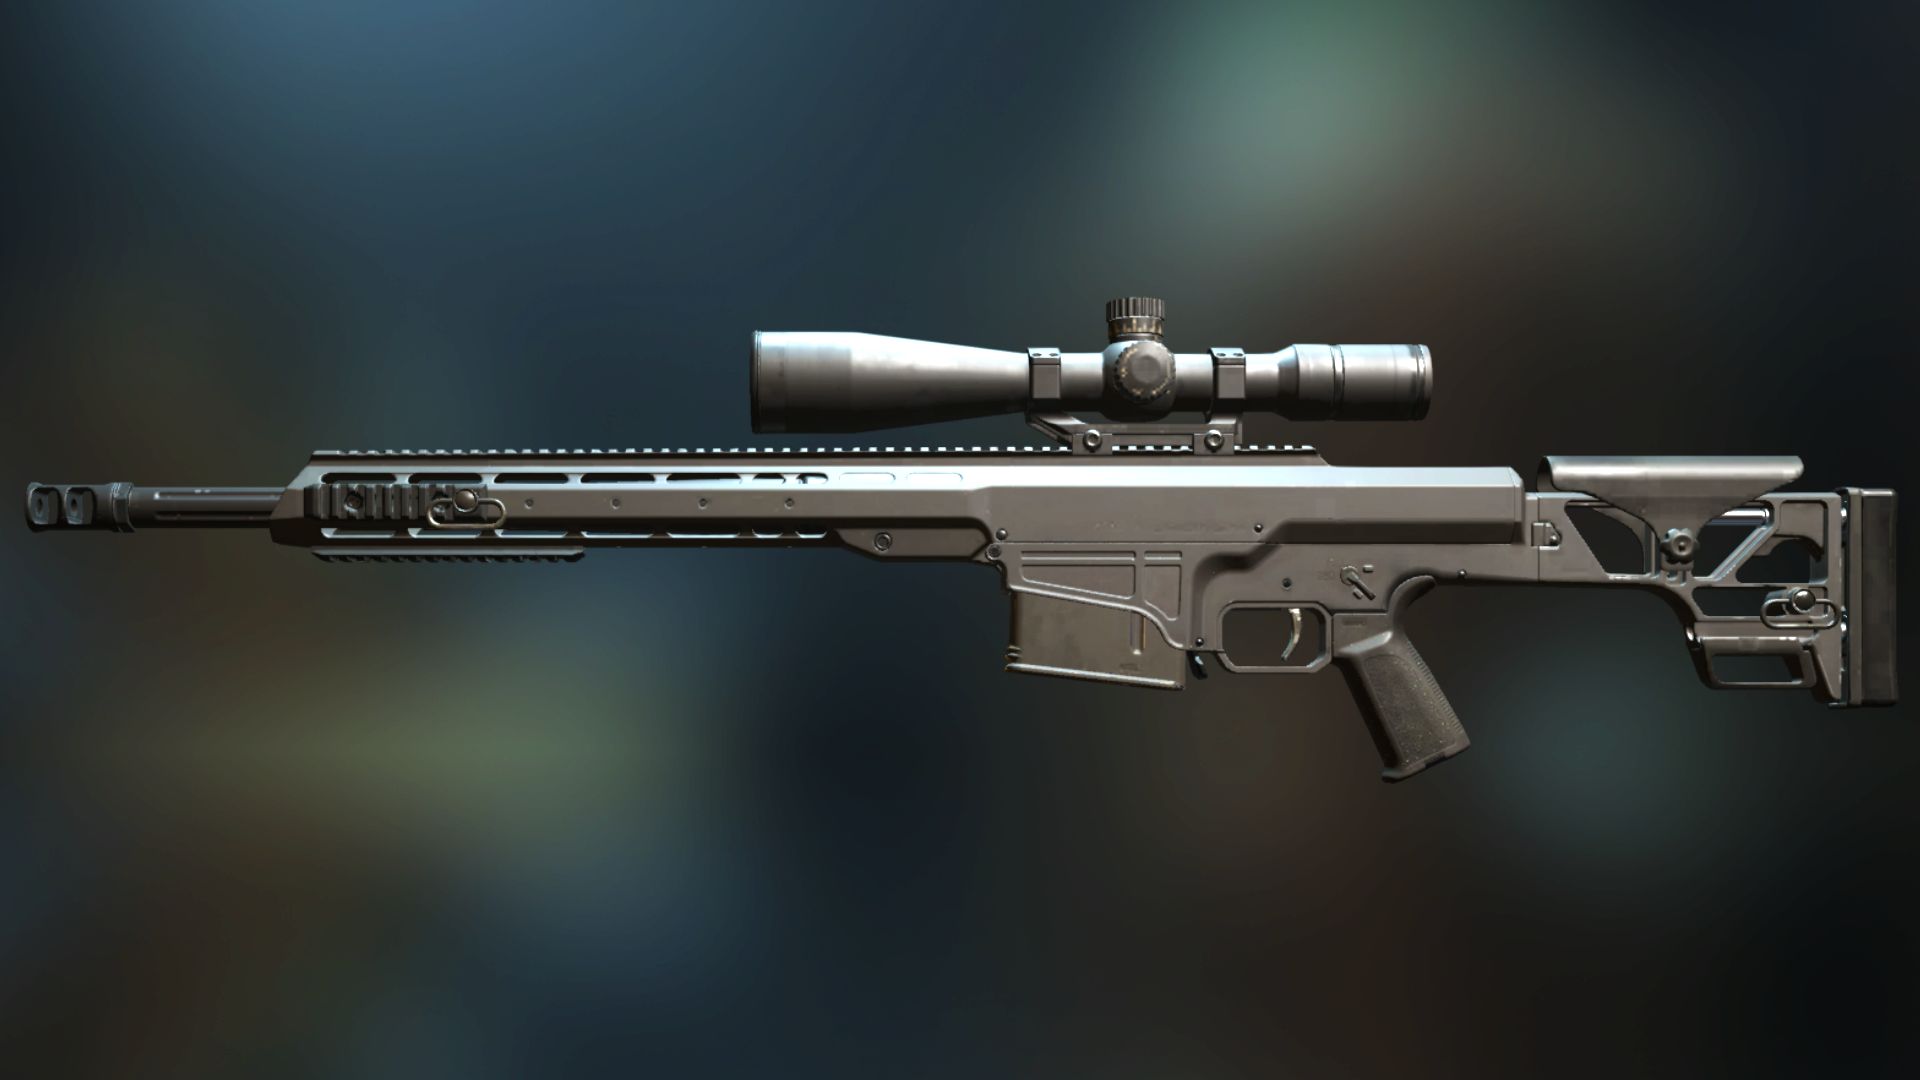 Metaphor Reveals 'DMR 2.0' Warzone 2 Rifle With Two-Shot Potential